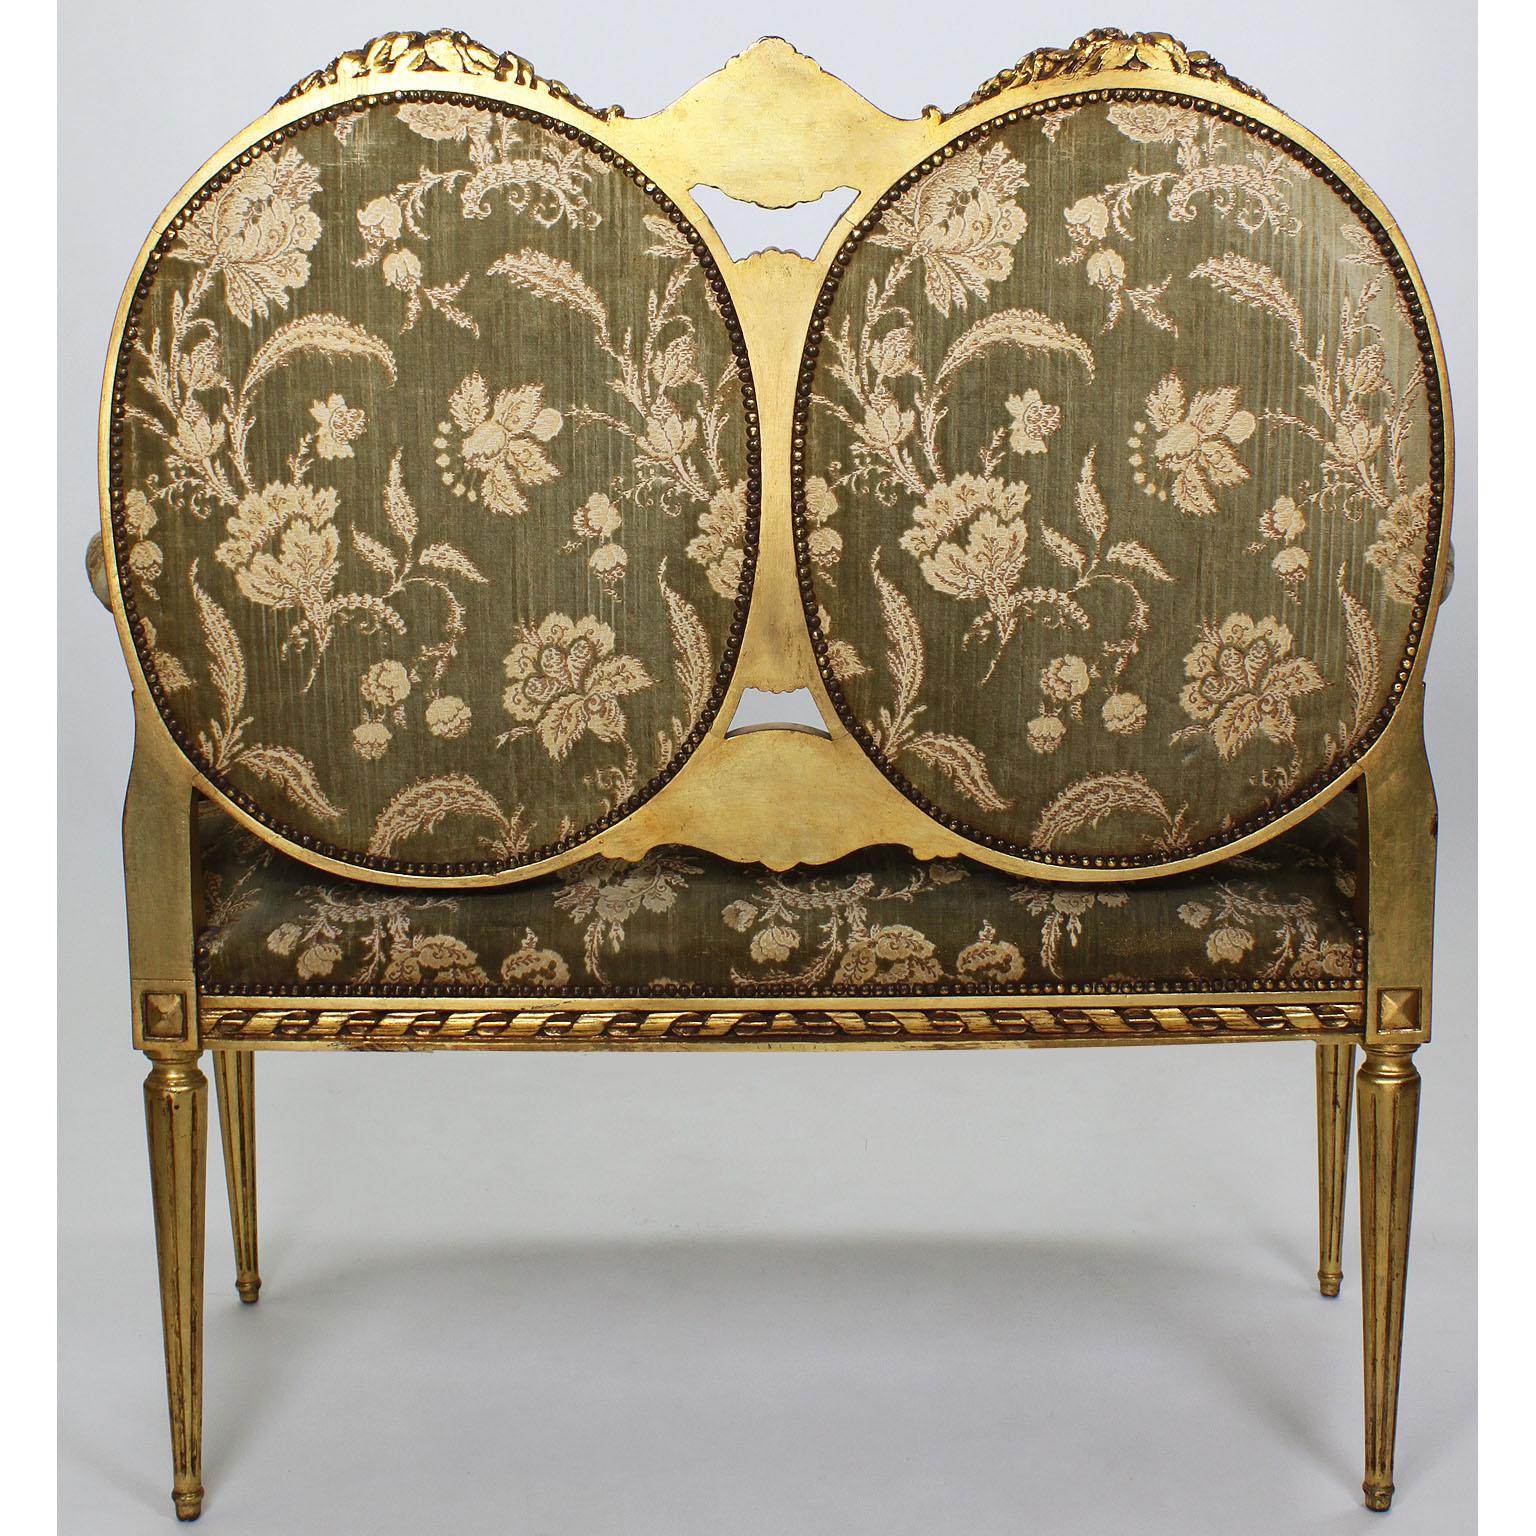 Early 20th Century French Belle Époque Louis XVI Style Giltwood Carved 3-Piece Parlor Salon Set